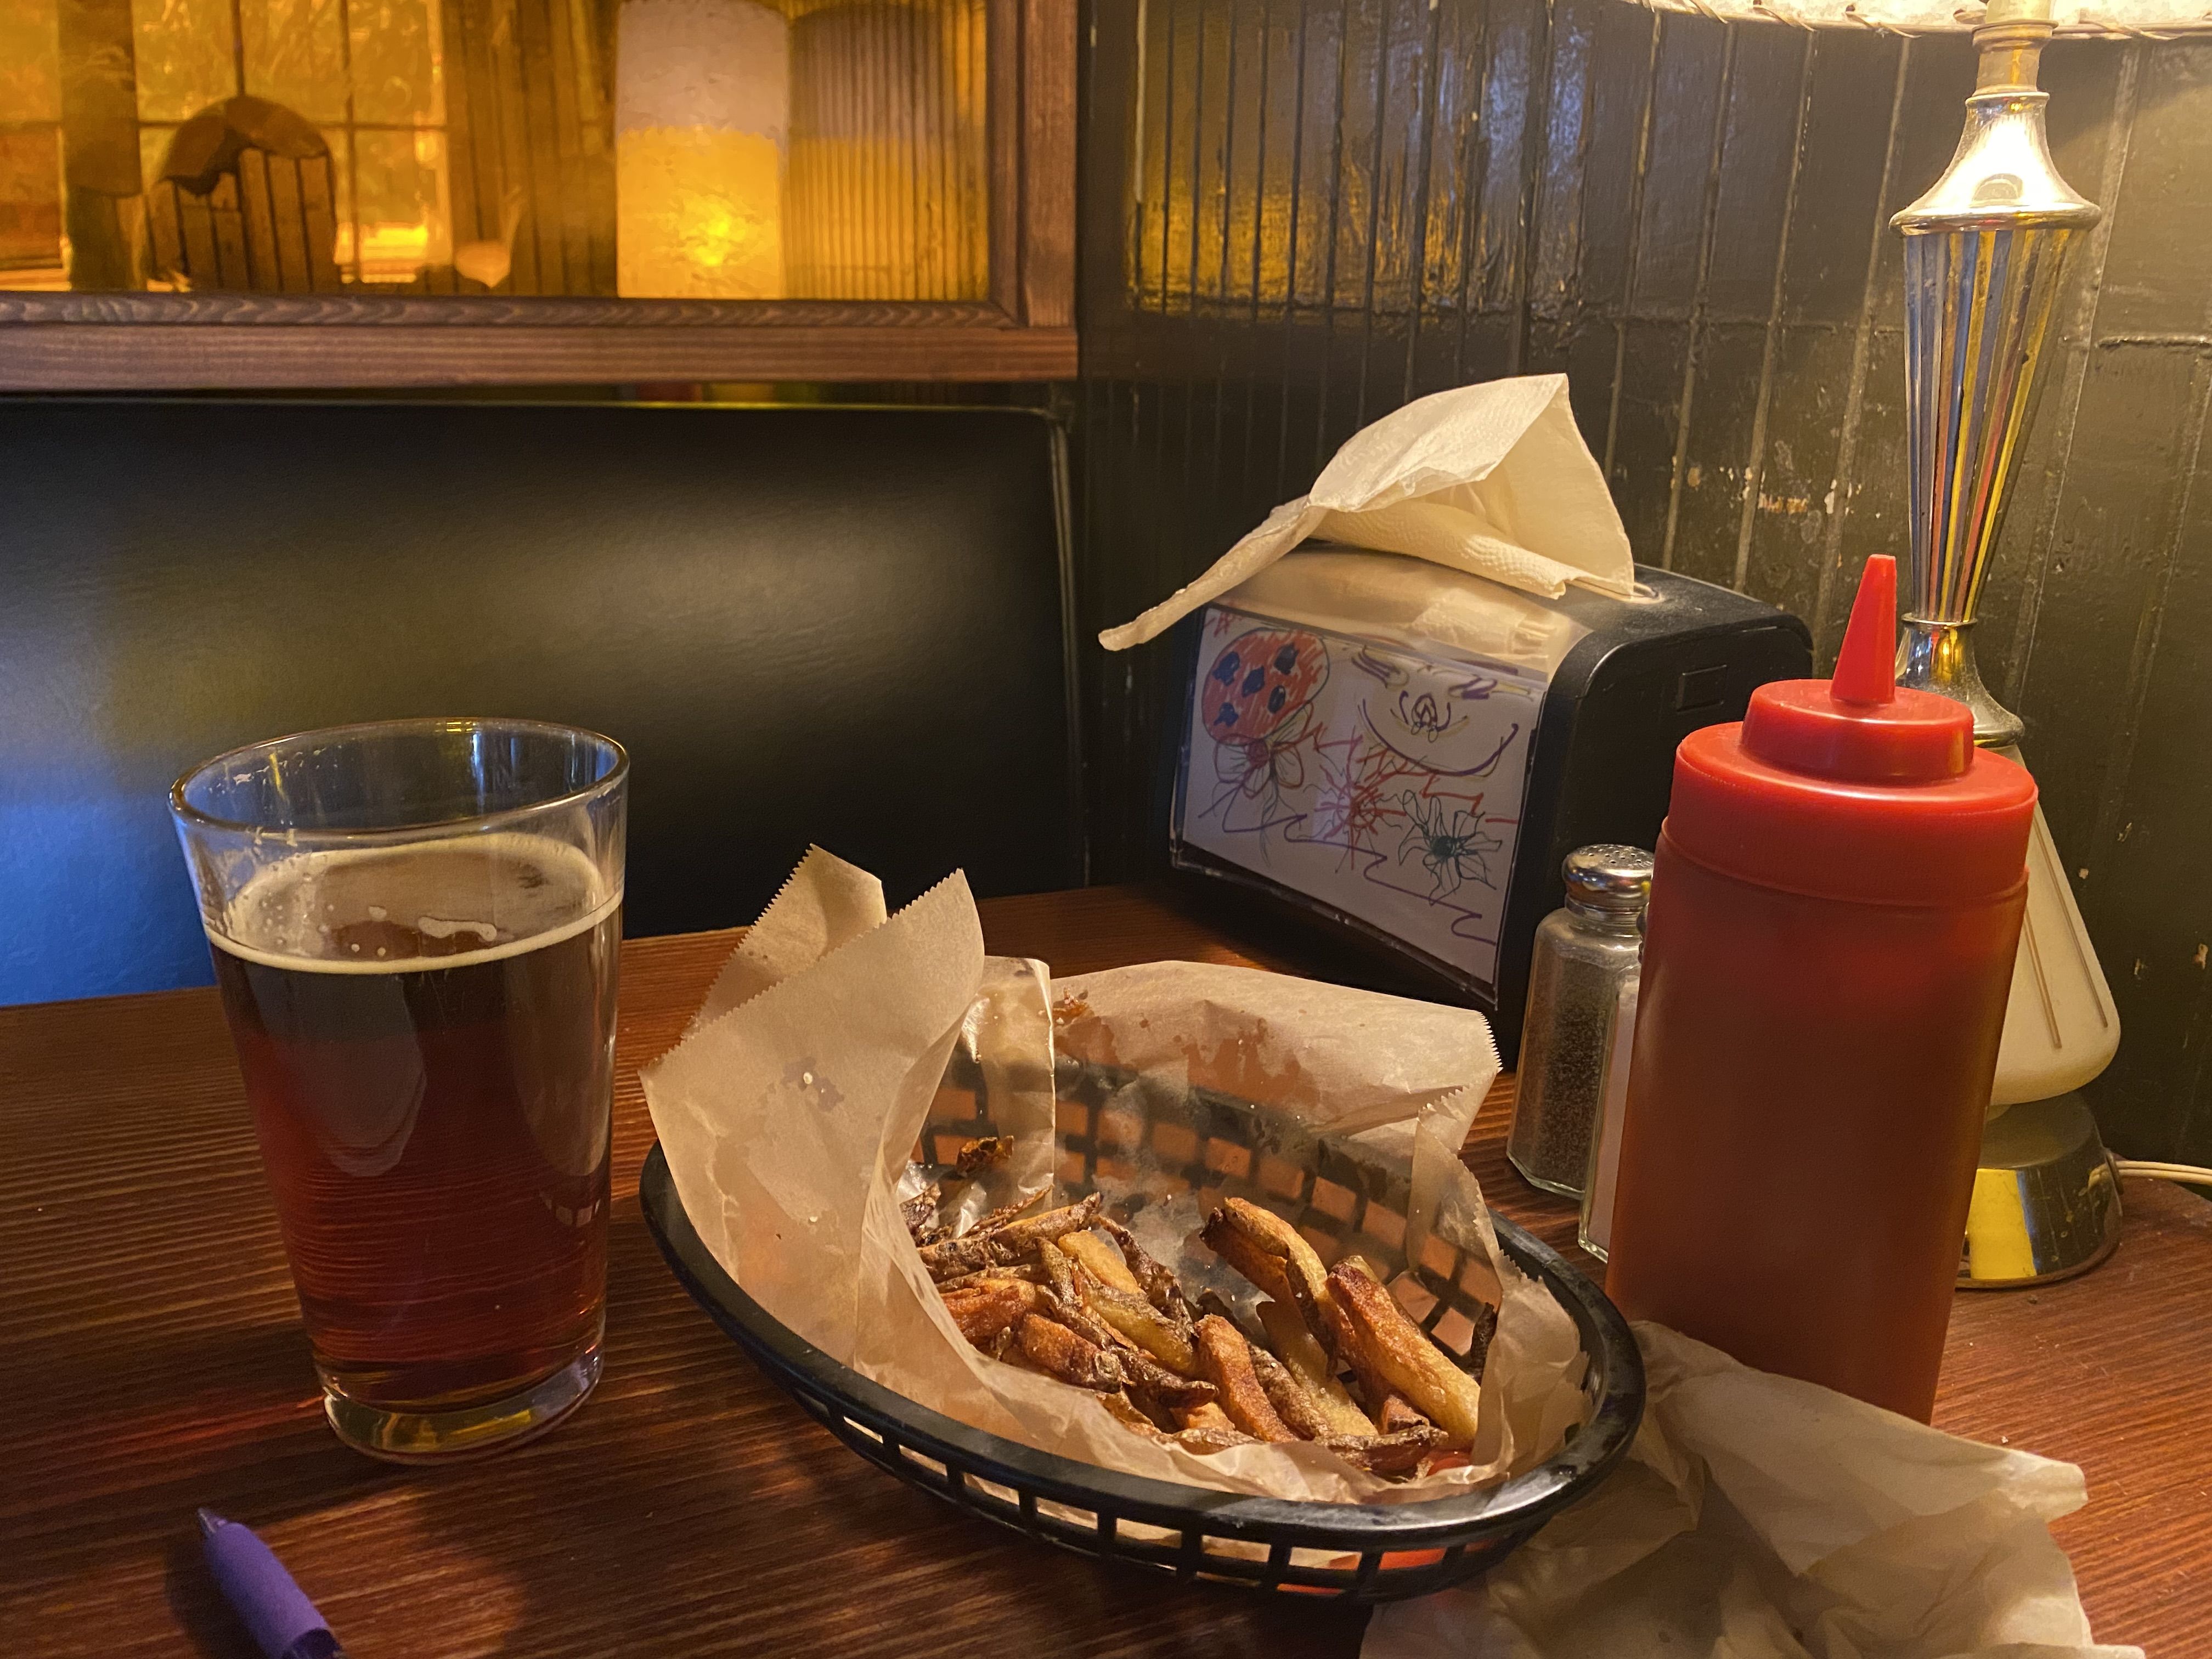 An almost empty basket of fries next to a squeeze bottle of ketchup on a booth table with green walls and a napkin holder.